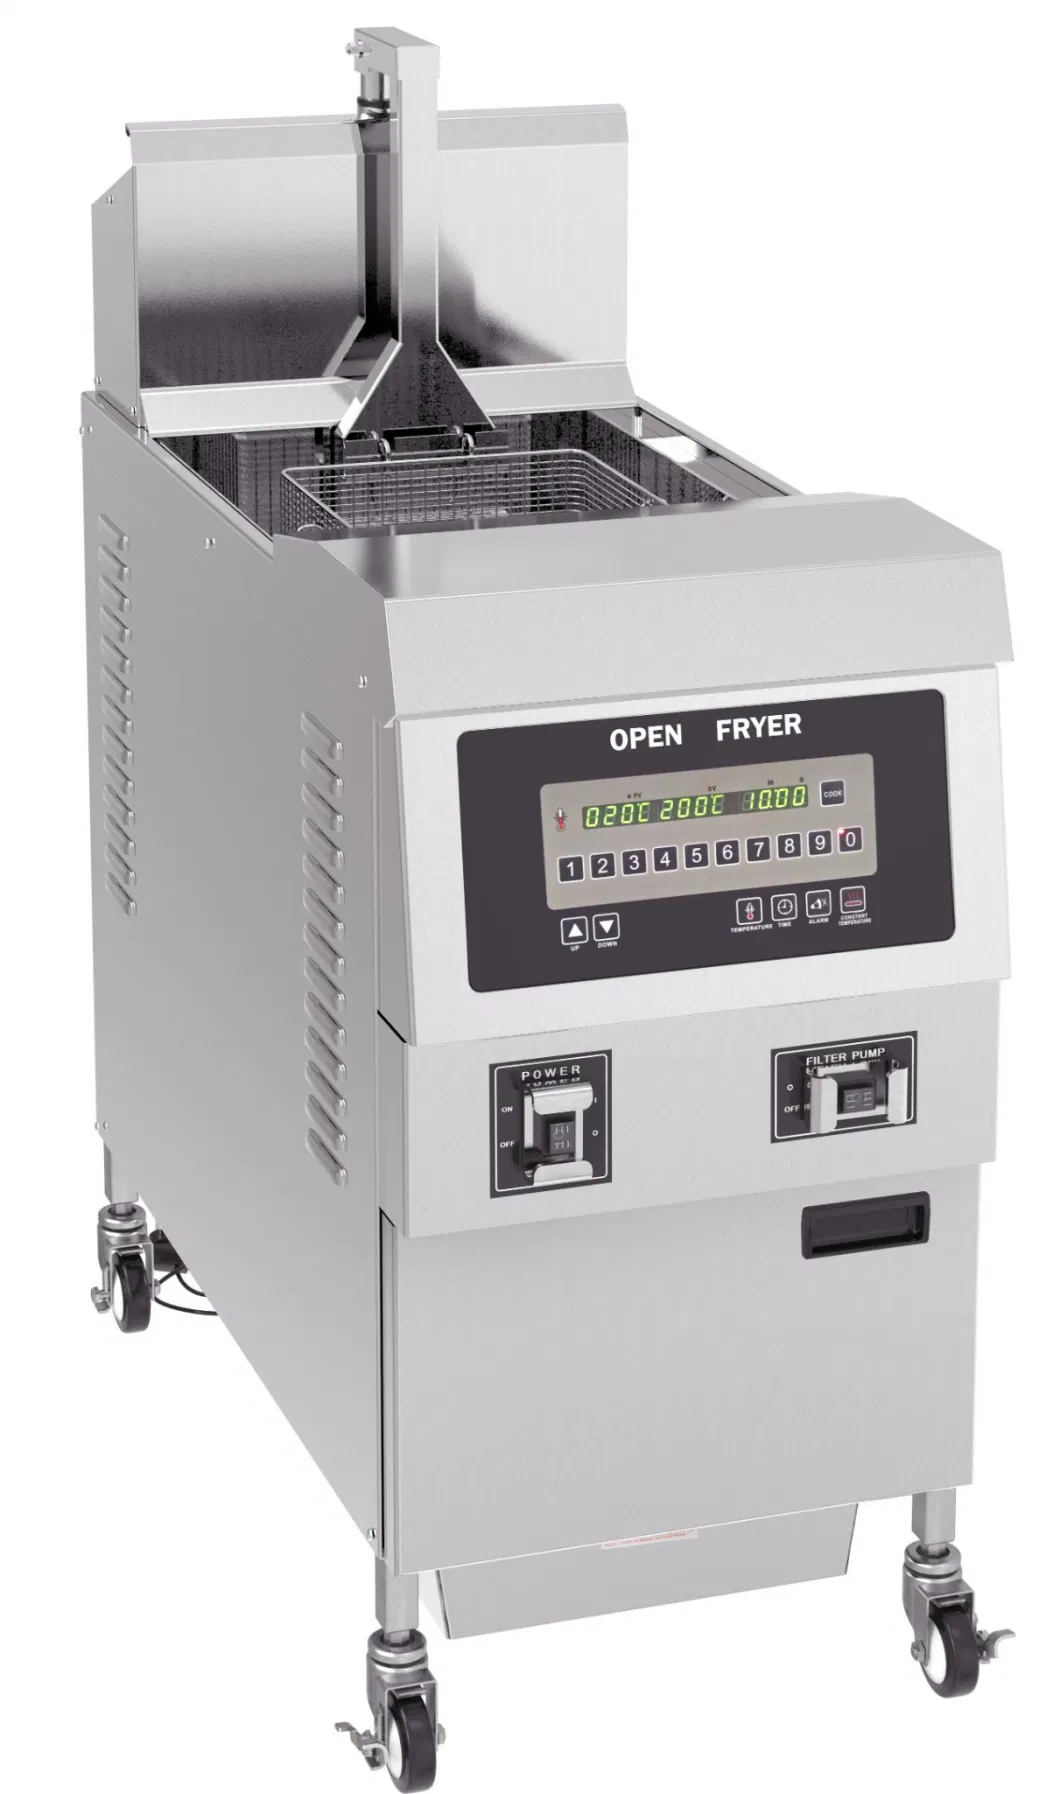 Energy Efficient Stainless Steel Electric Fryer Used to Fry Chicken with Oil Filter